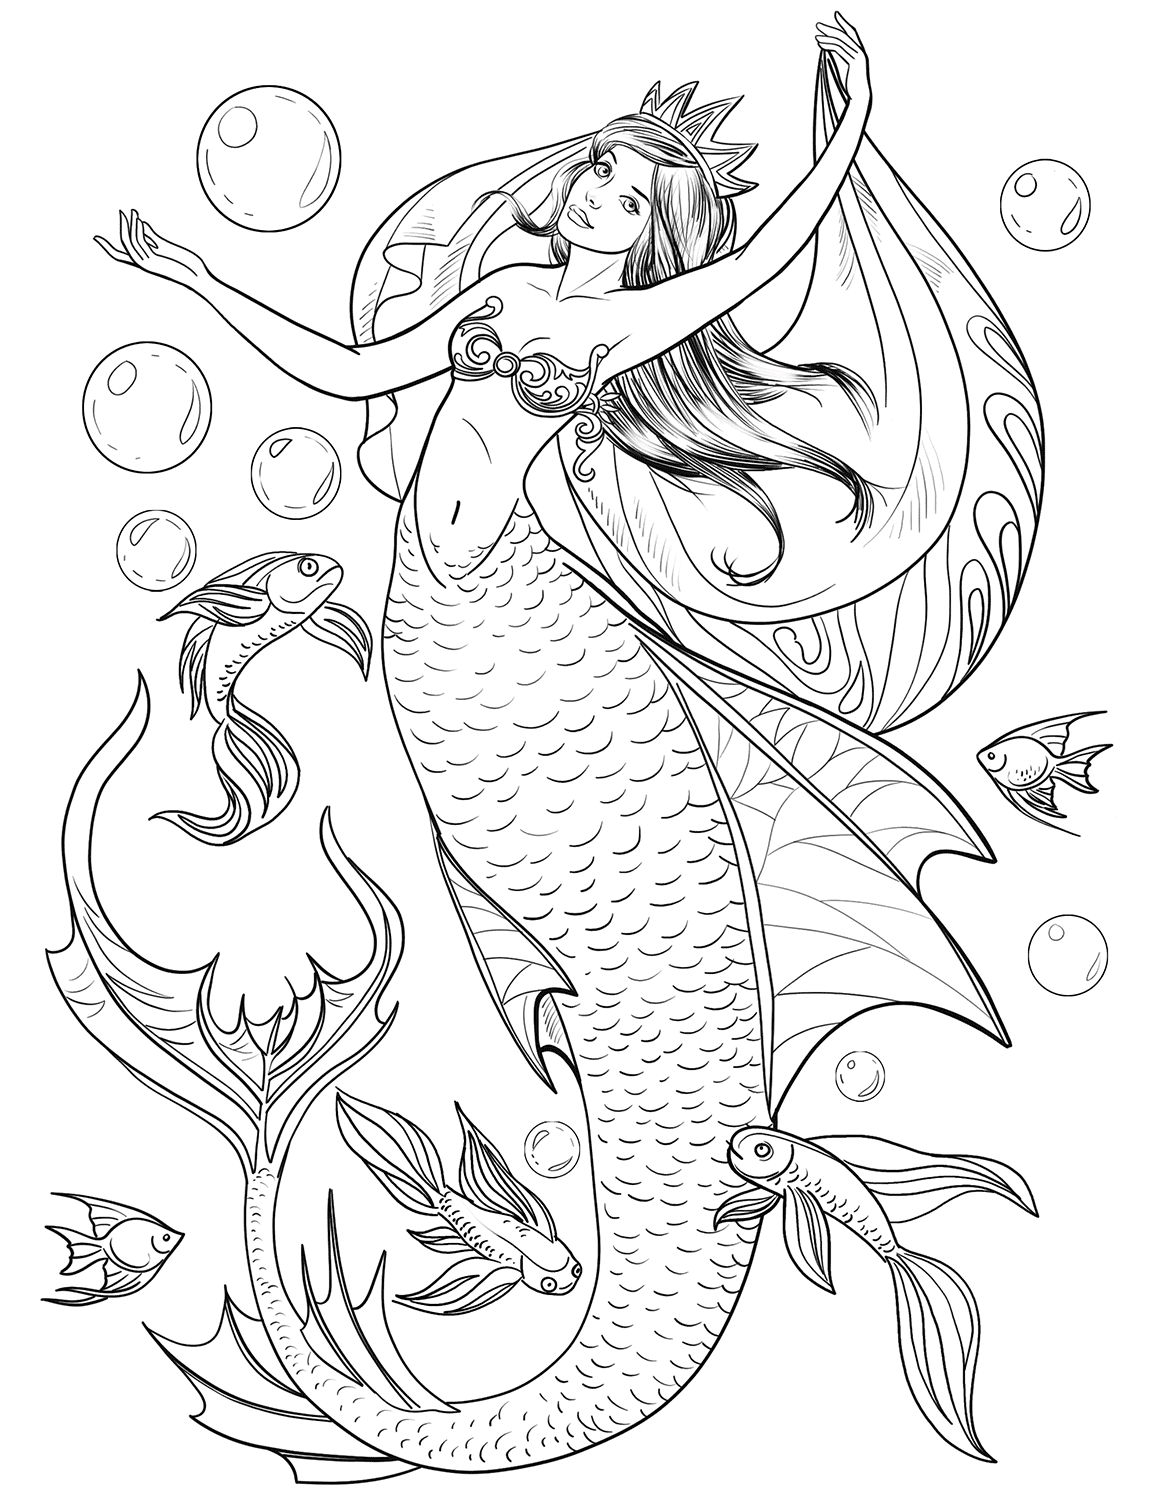 Mermaid coloring pages for adults